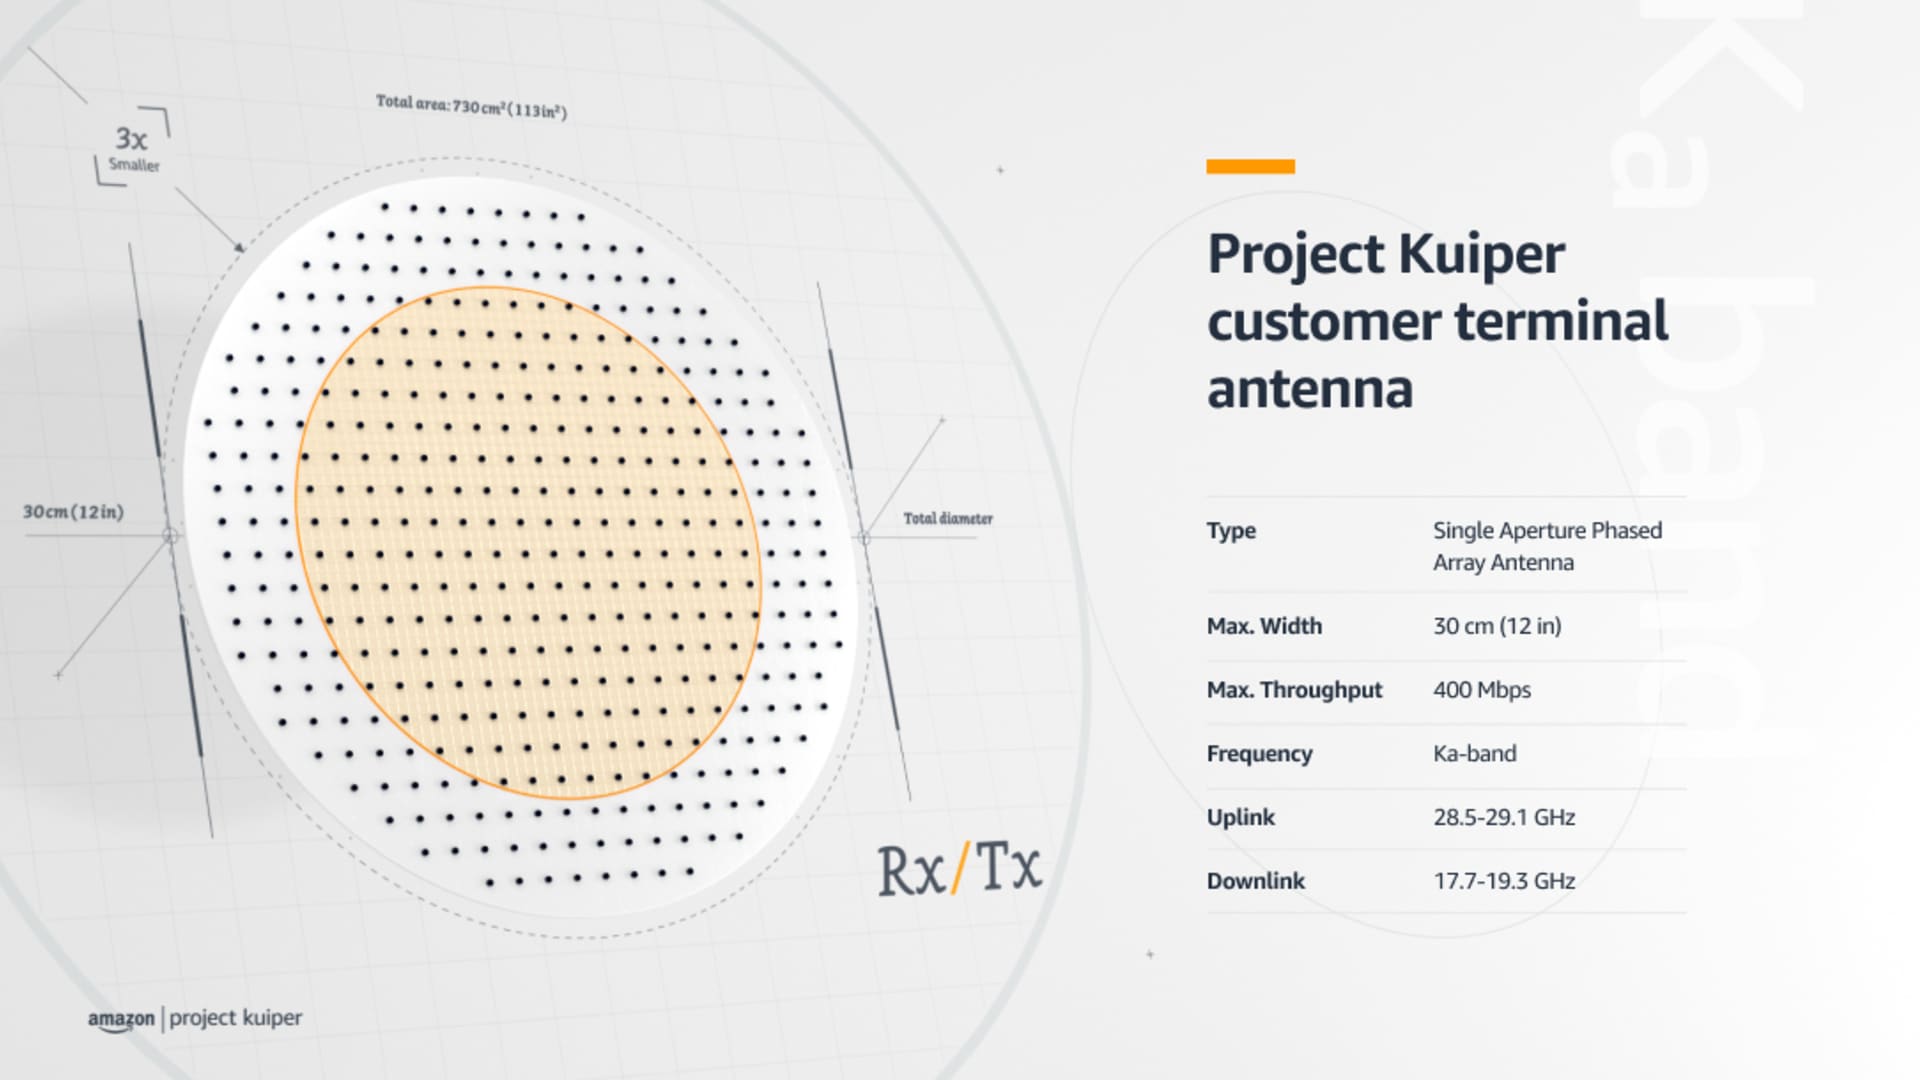 A diagram of Project Kuiper's antenna for its customer terminals.